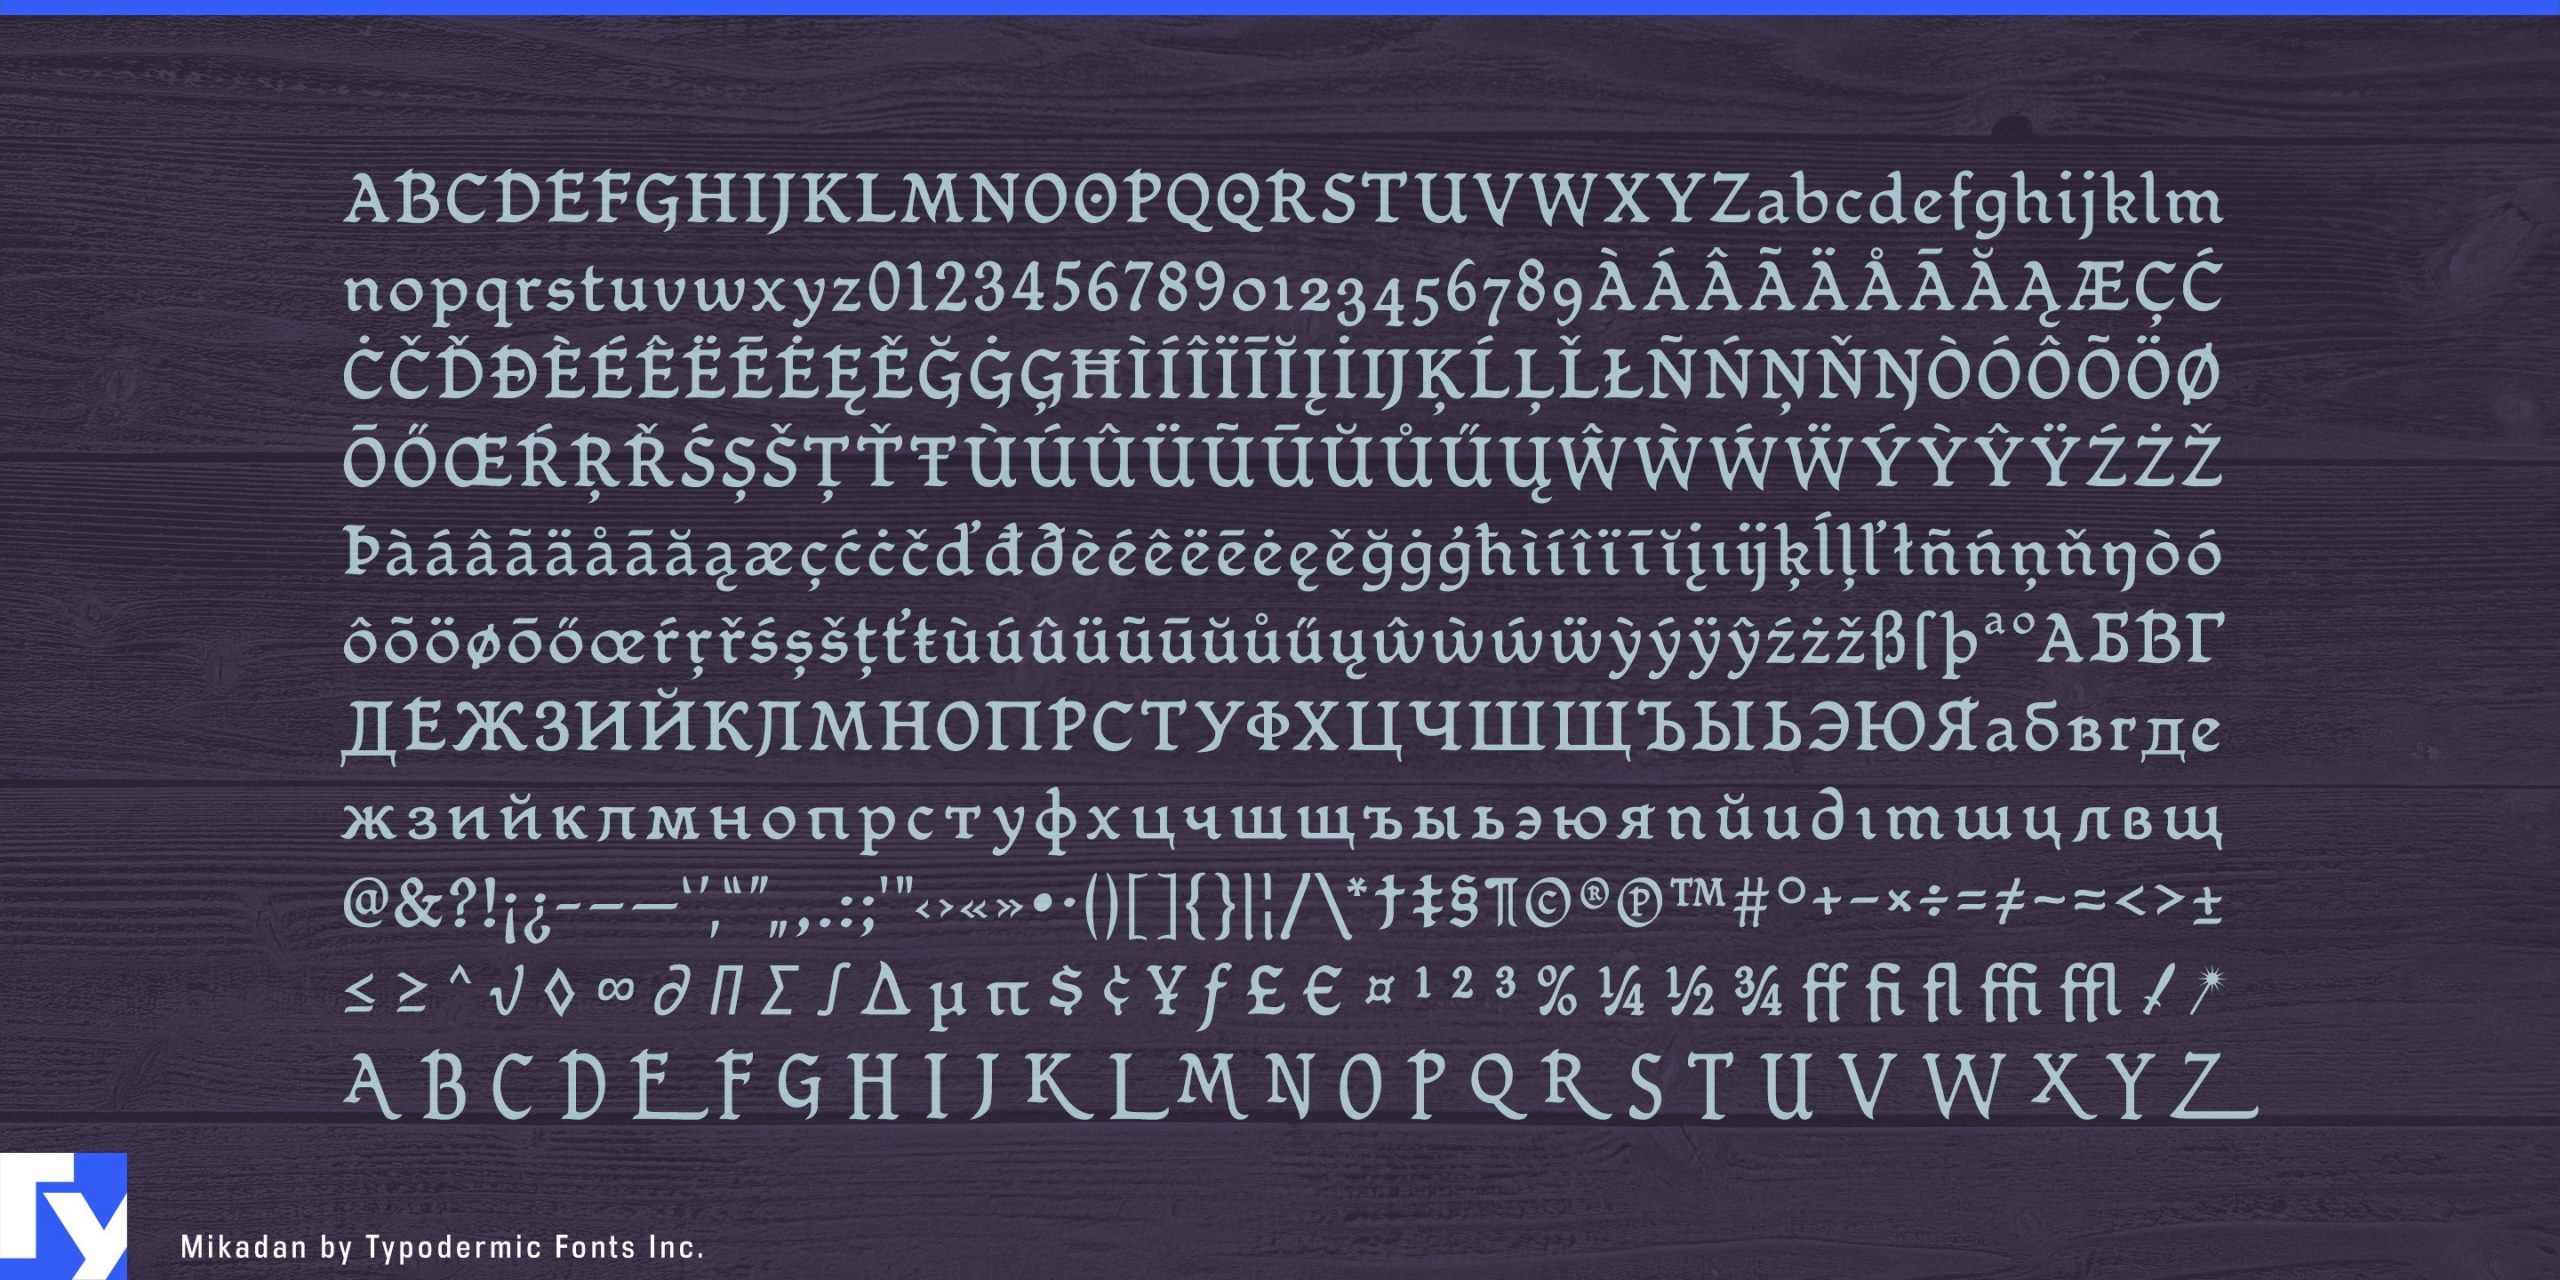 Mikadan Typeface: A Tale of Splendor and Medieval Beauty